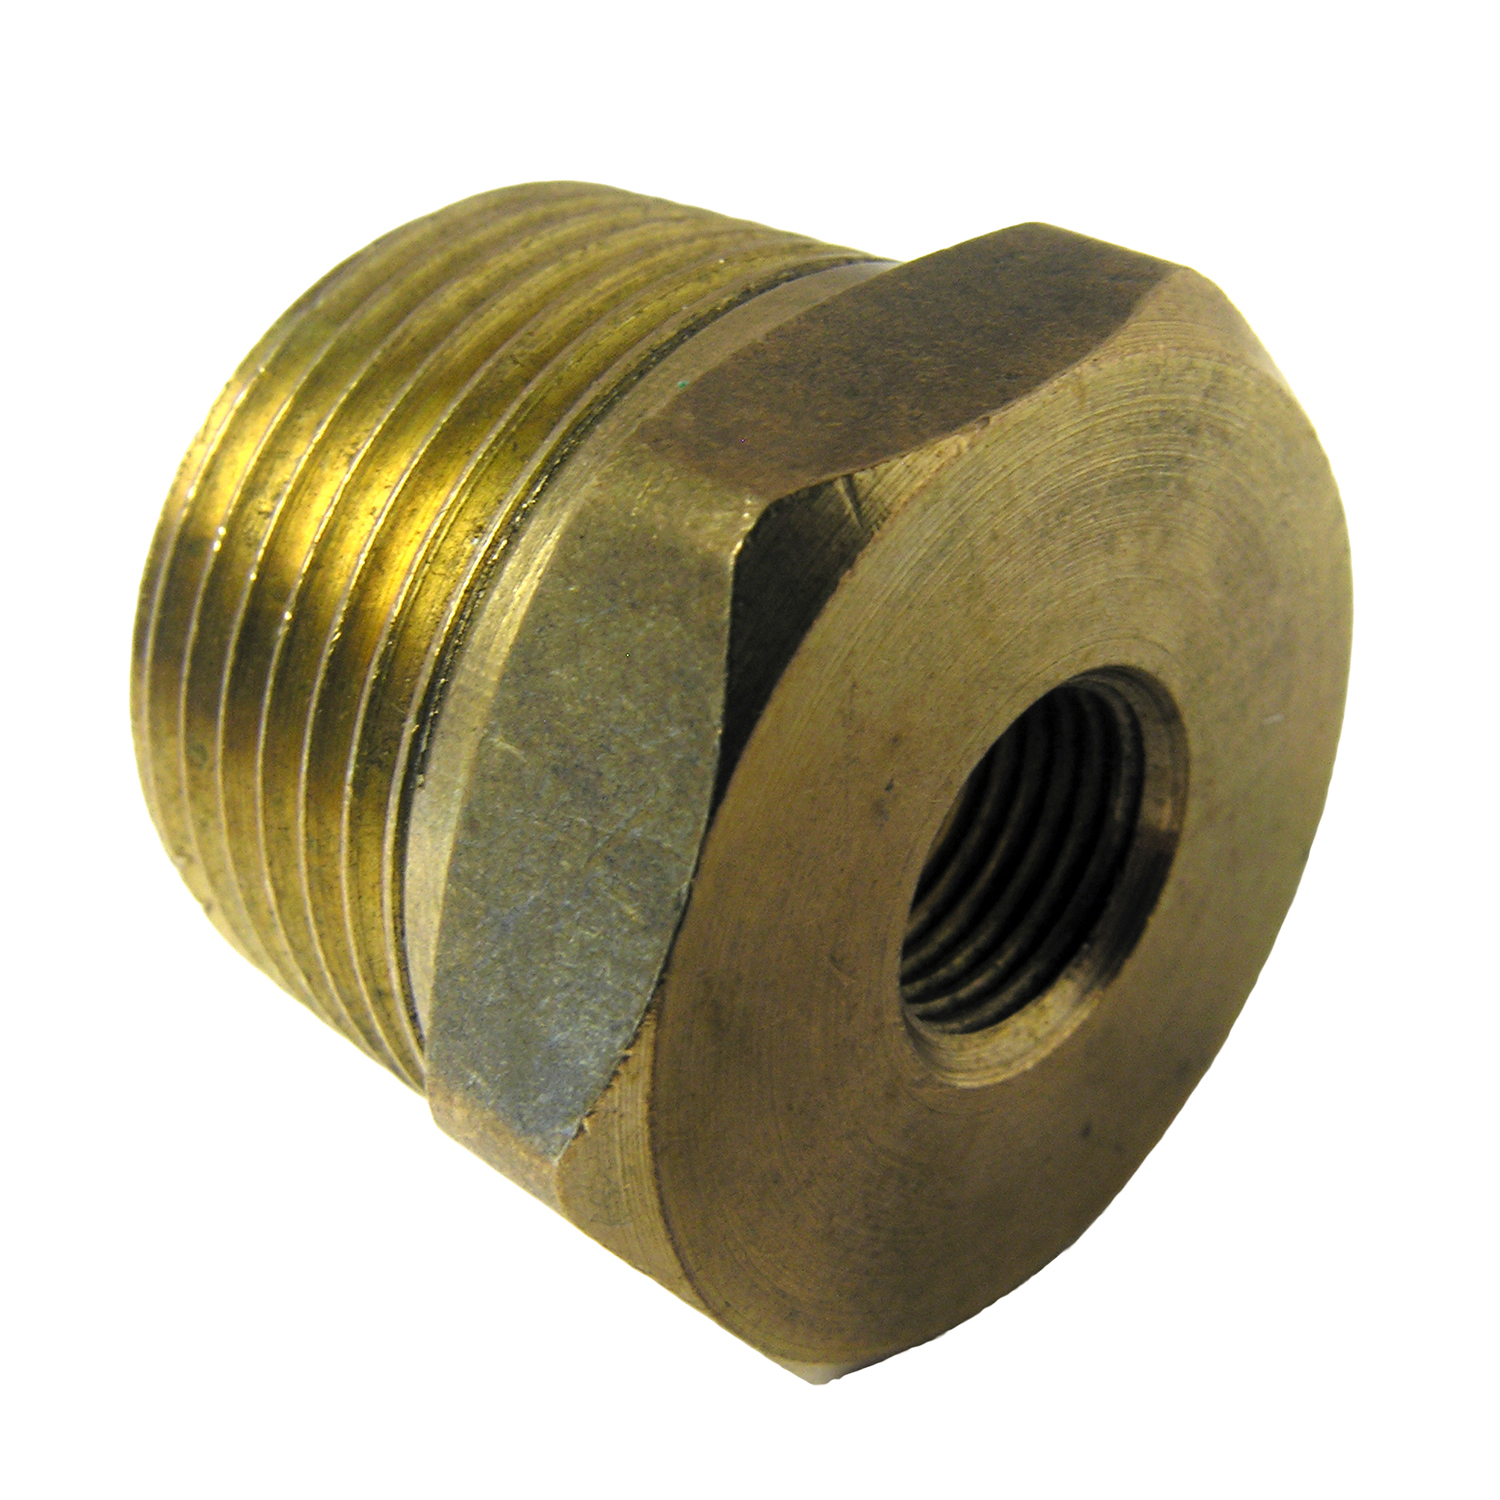 17-9253 Hex Pipe Bushing, 3/4 x 1/8 in, MPT x FPT, Brass, 125 psi Pressure